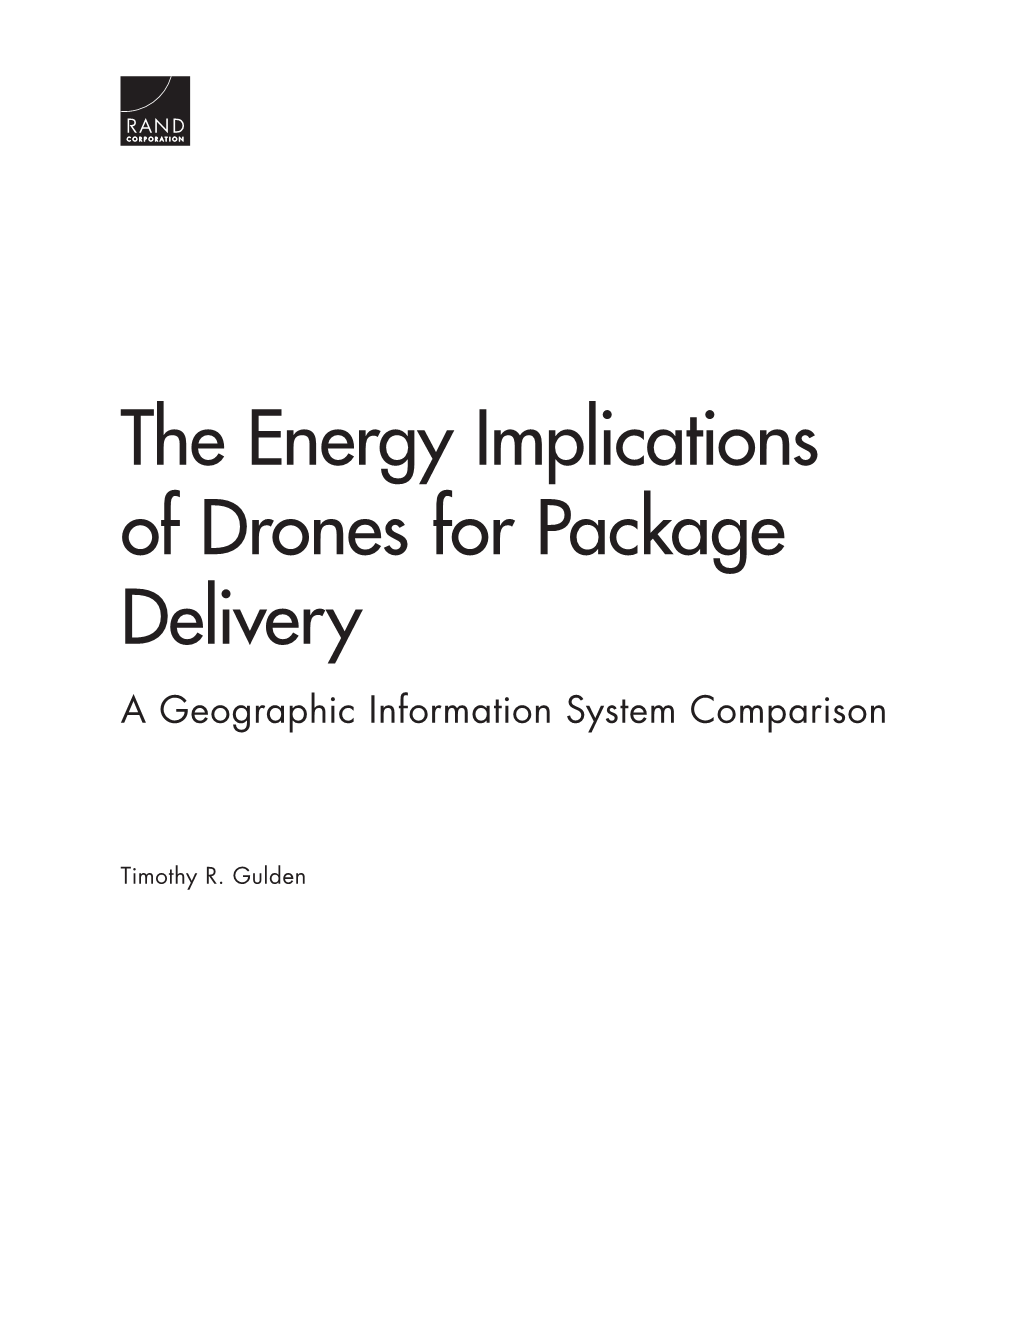 The Energy Implications of Drones for Package Delivery a Geographic Information System Comparison